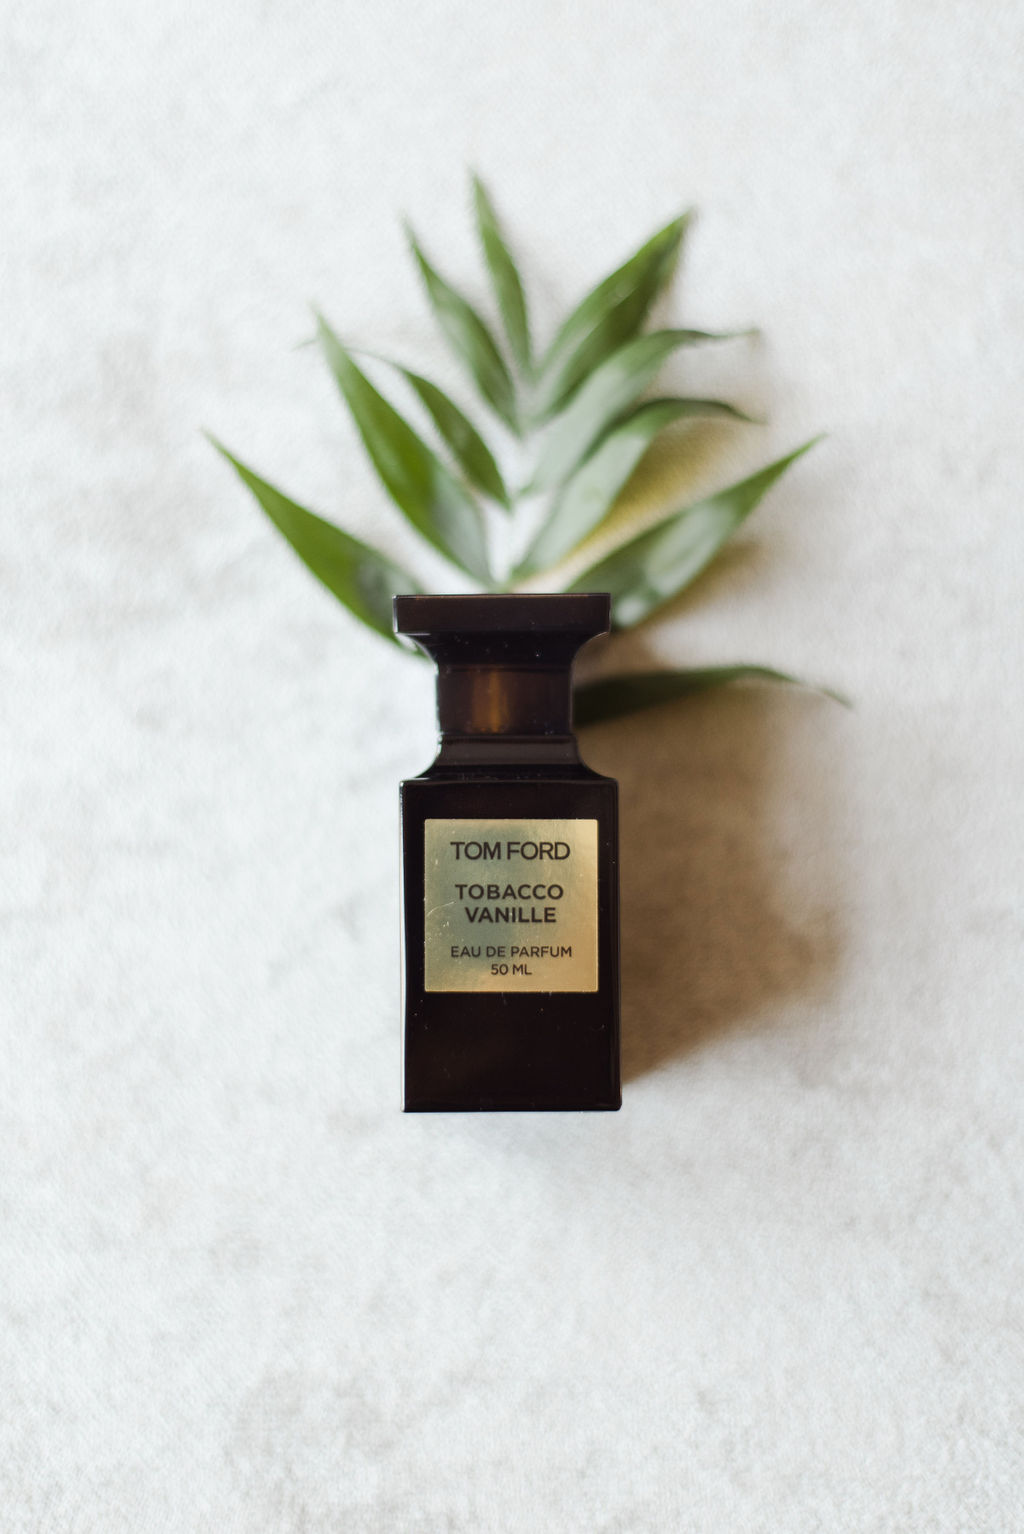 Tom Ford Tobacco photographed with greenery against a white marble backdrop